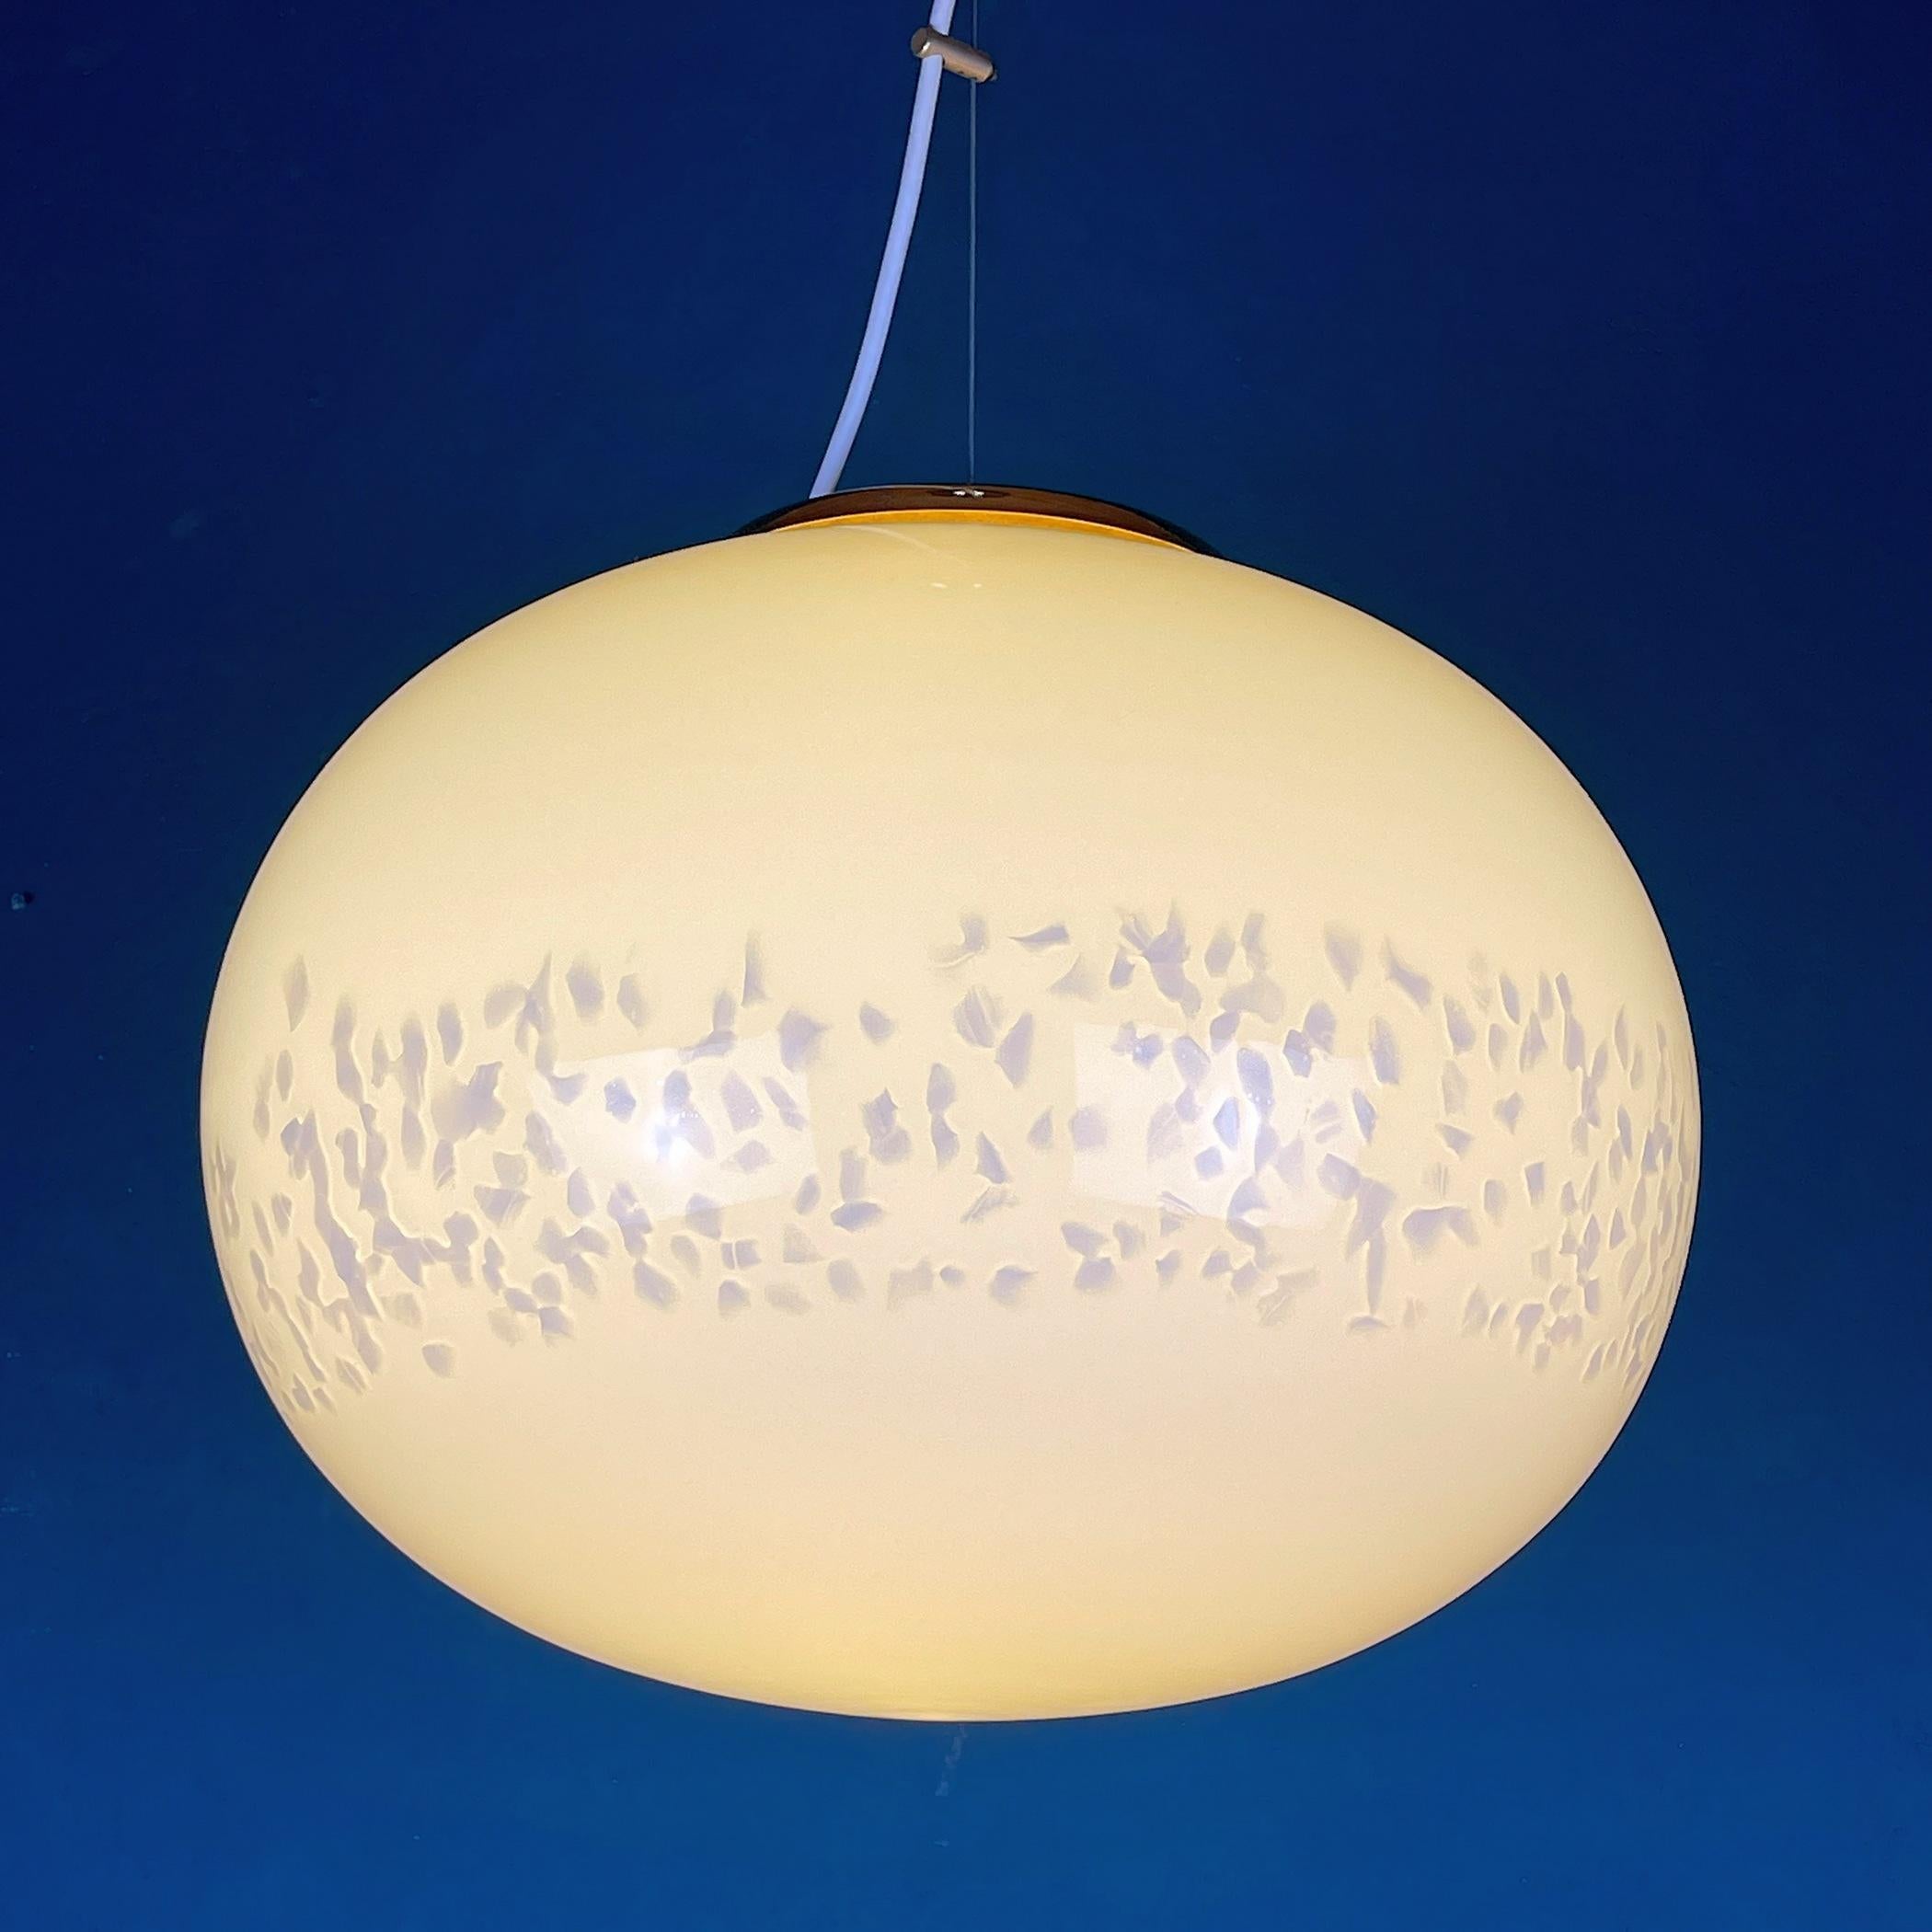 Classic beige murano pendant lamp by Vetri Murano made in Italy in the 1970s. Very beautiful beige Murano glass with bends. The lamp is in perfect condition, fully functional. No chips or cracks. Maximum height with cable 80 cm. Requires standard